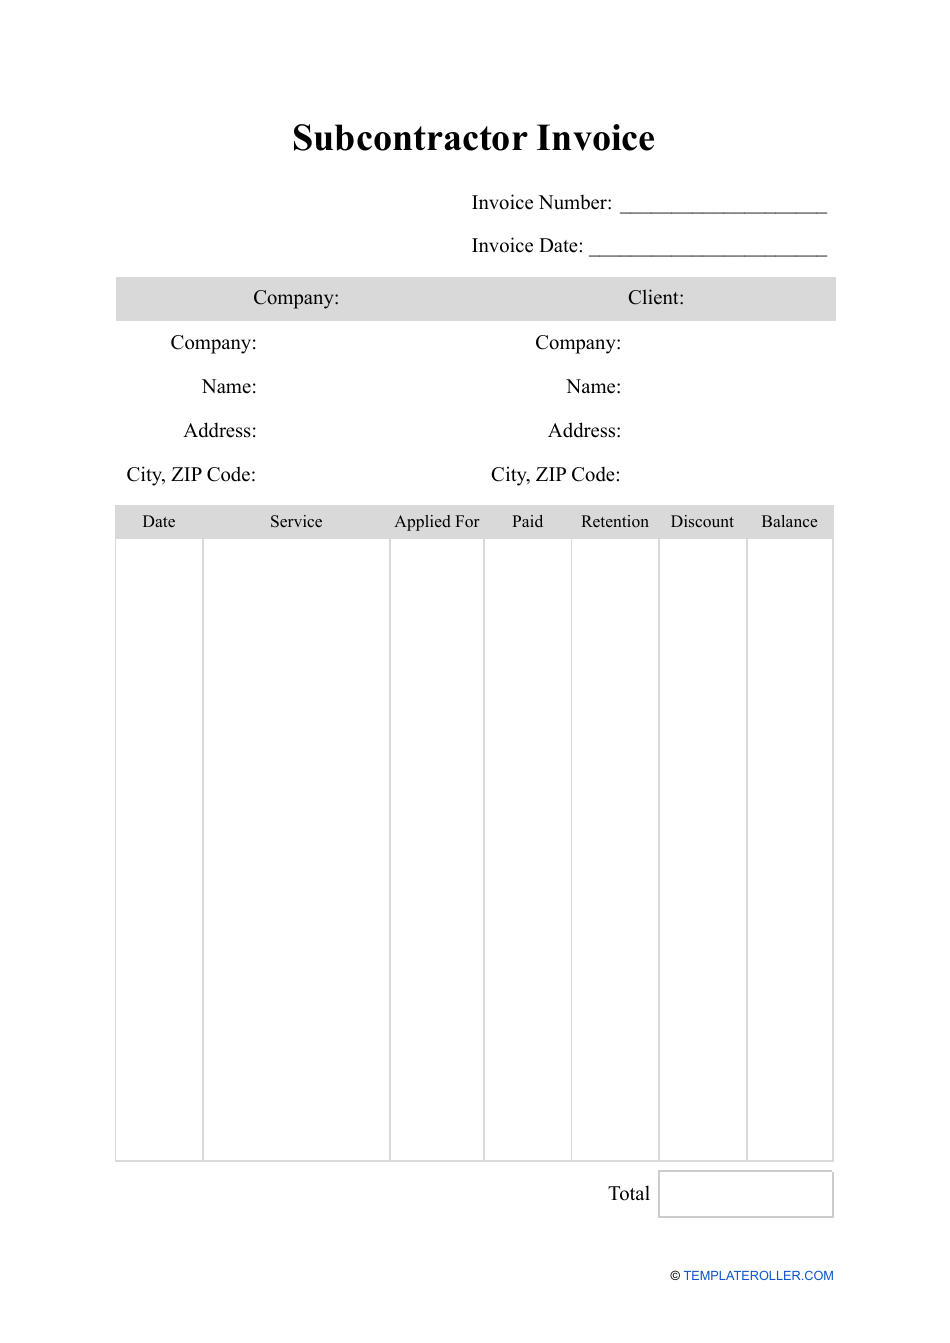 Subcontractor Invoice Template, Page 1